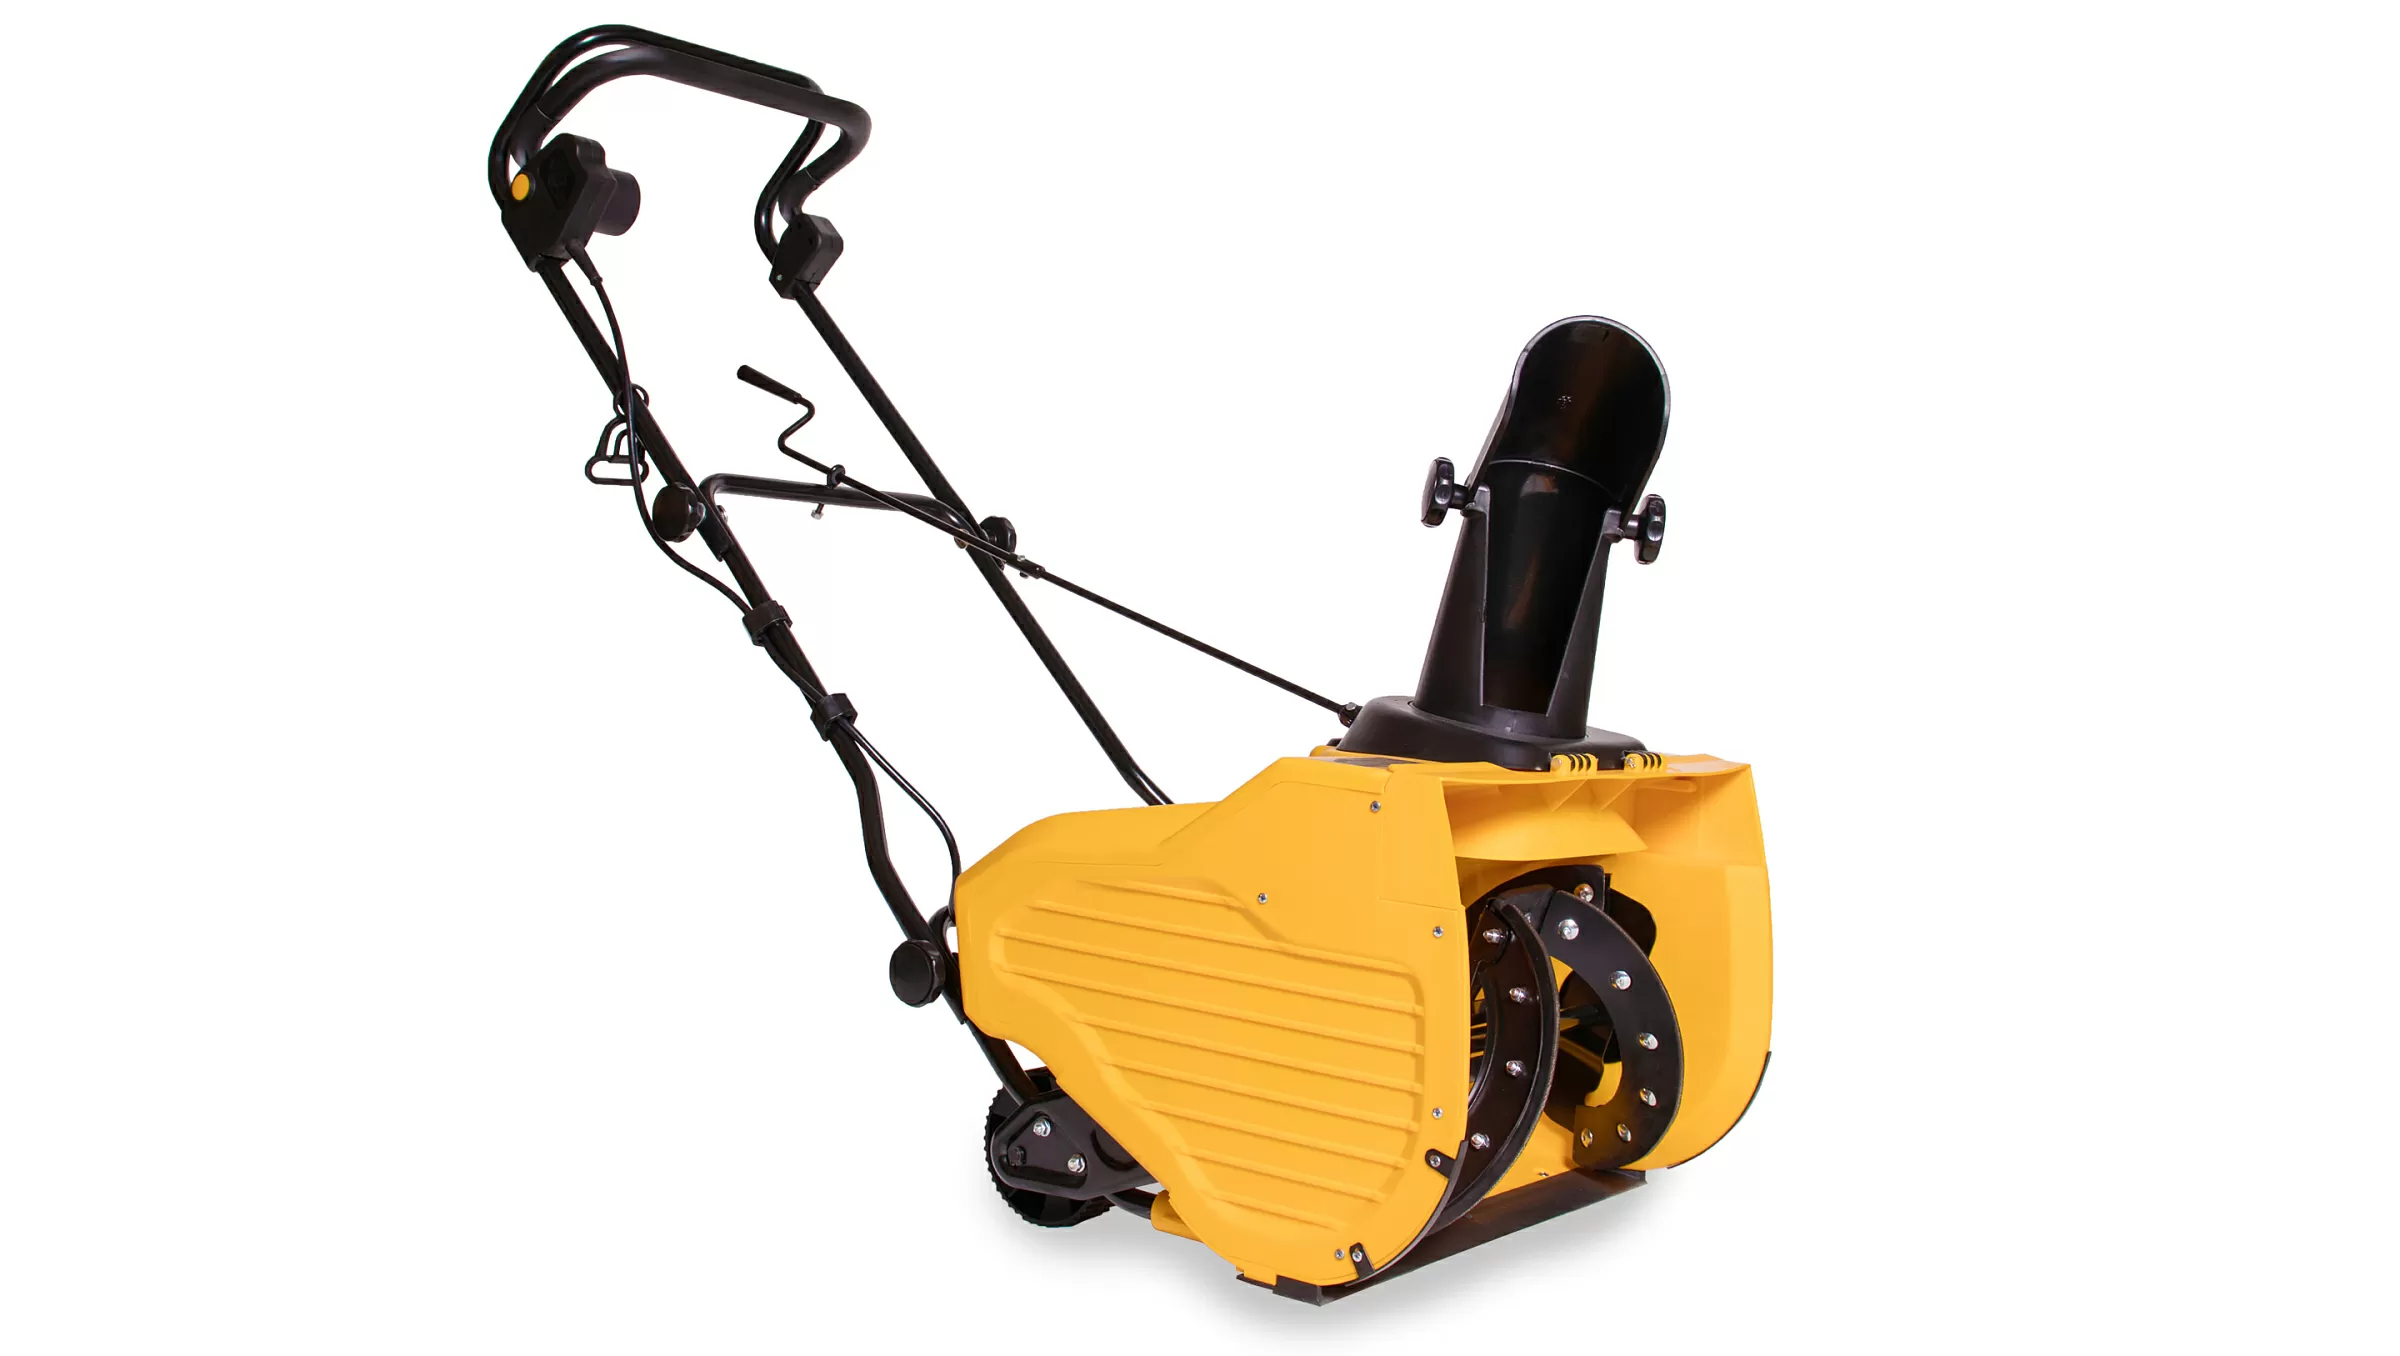 An image of an electric snow blower, specifically the Champion STE1650 model, with its technical specifications and price listed